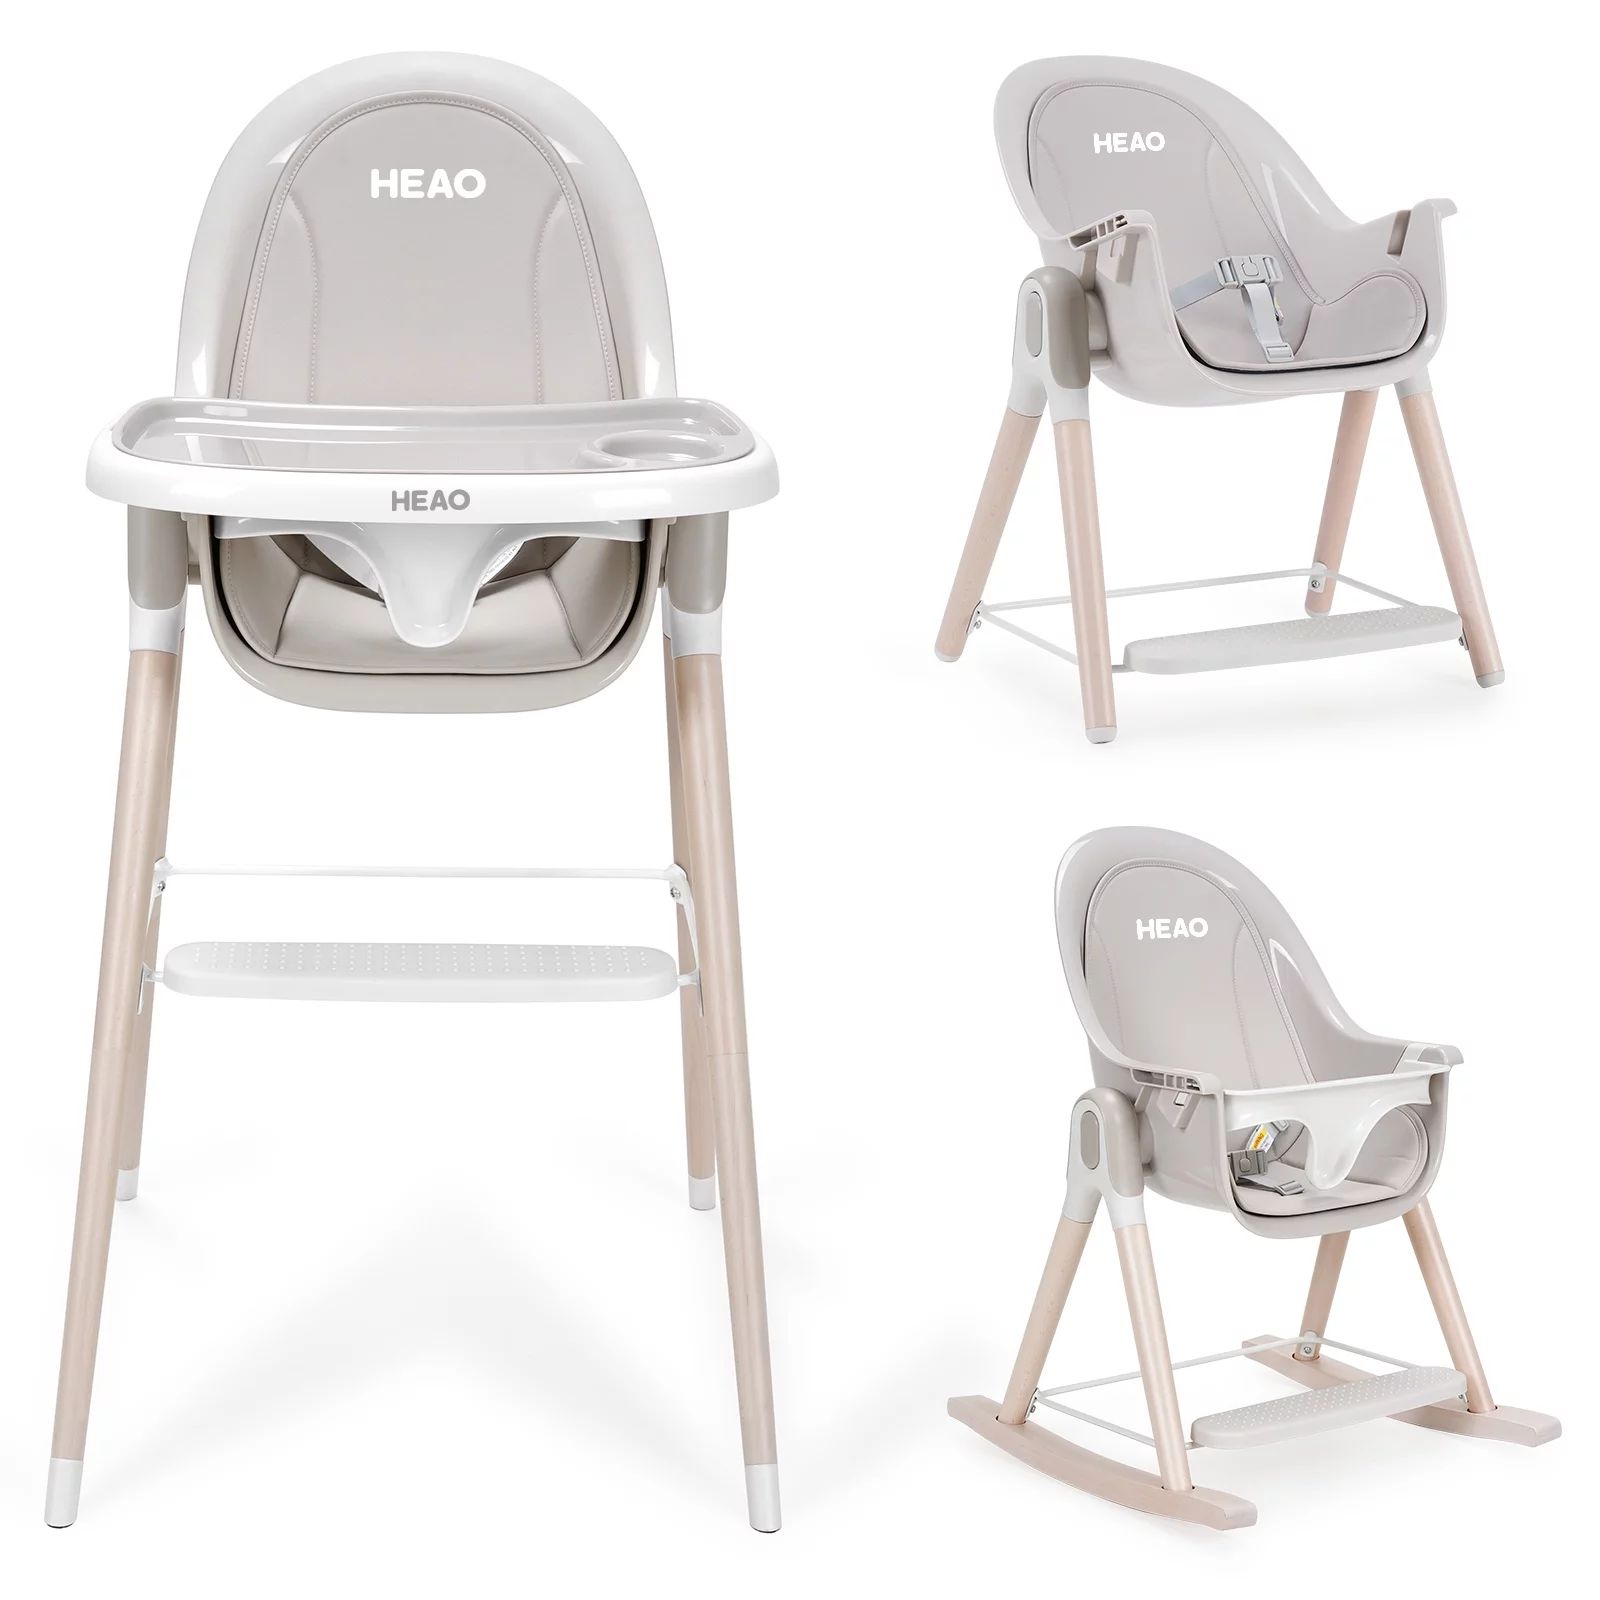 HEAO 4 in 1 Baby Wooden High Chair Rocking Chair -Reclining Seat with Removable Tray&Cushion | Walmart (US)